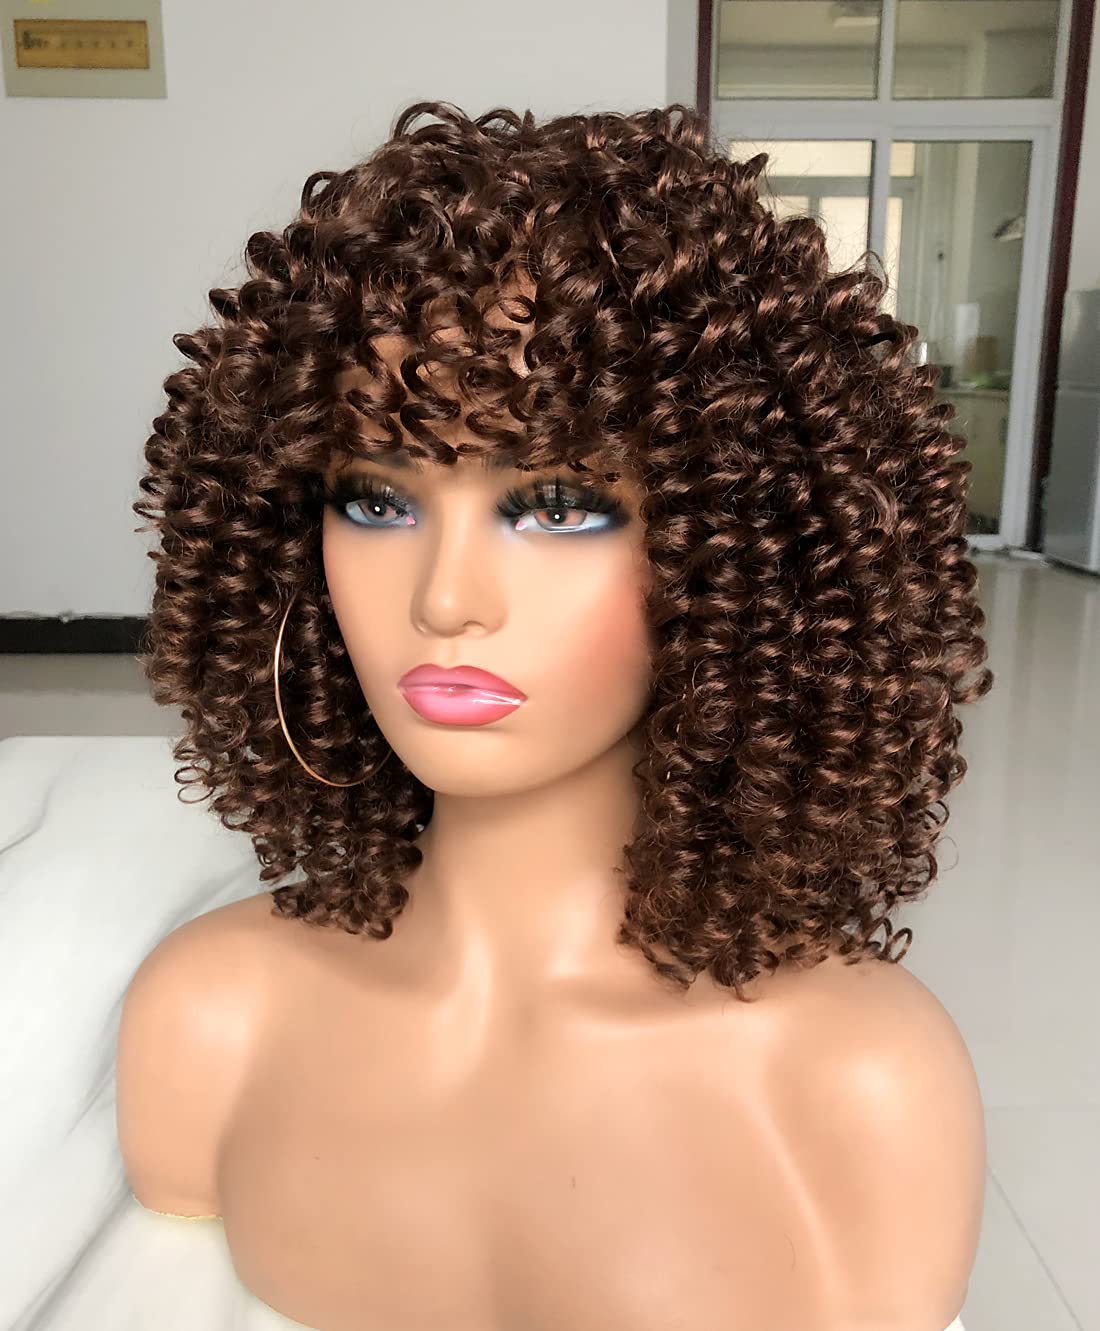 Short Curly Wig for Black Women with Bangs Big Bouncy Fluffy Kinky Curly Wig Heat Resist Soft Synthetic 2Tone Ombre Darkest Brown Short Curly Afro Wig